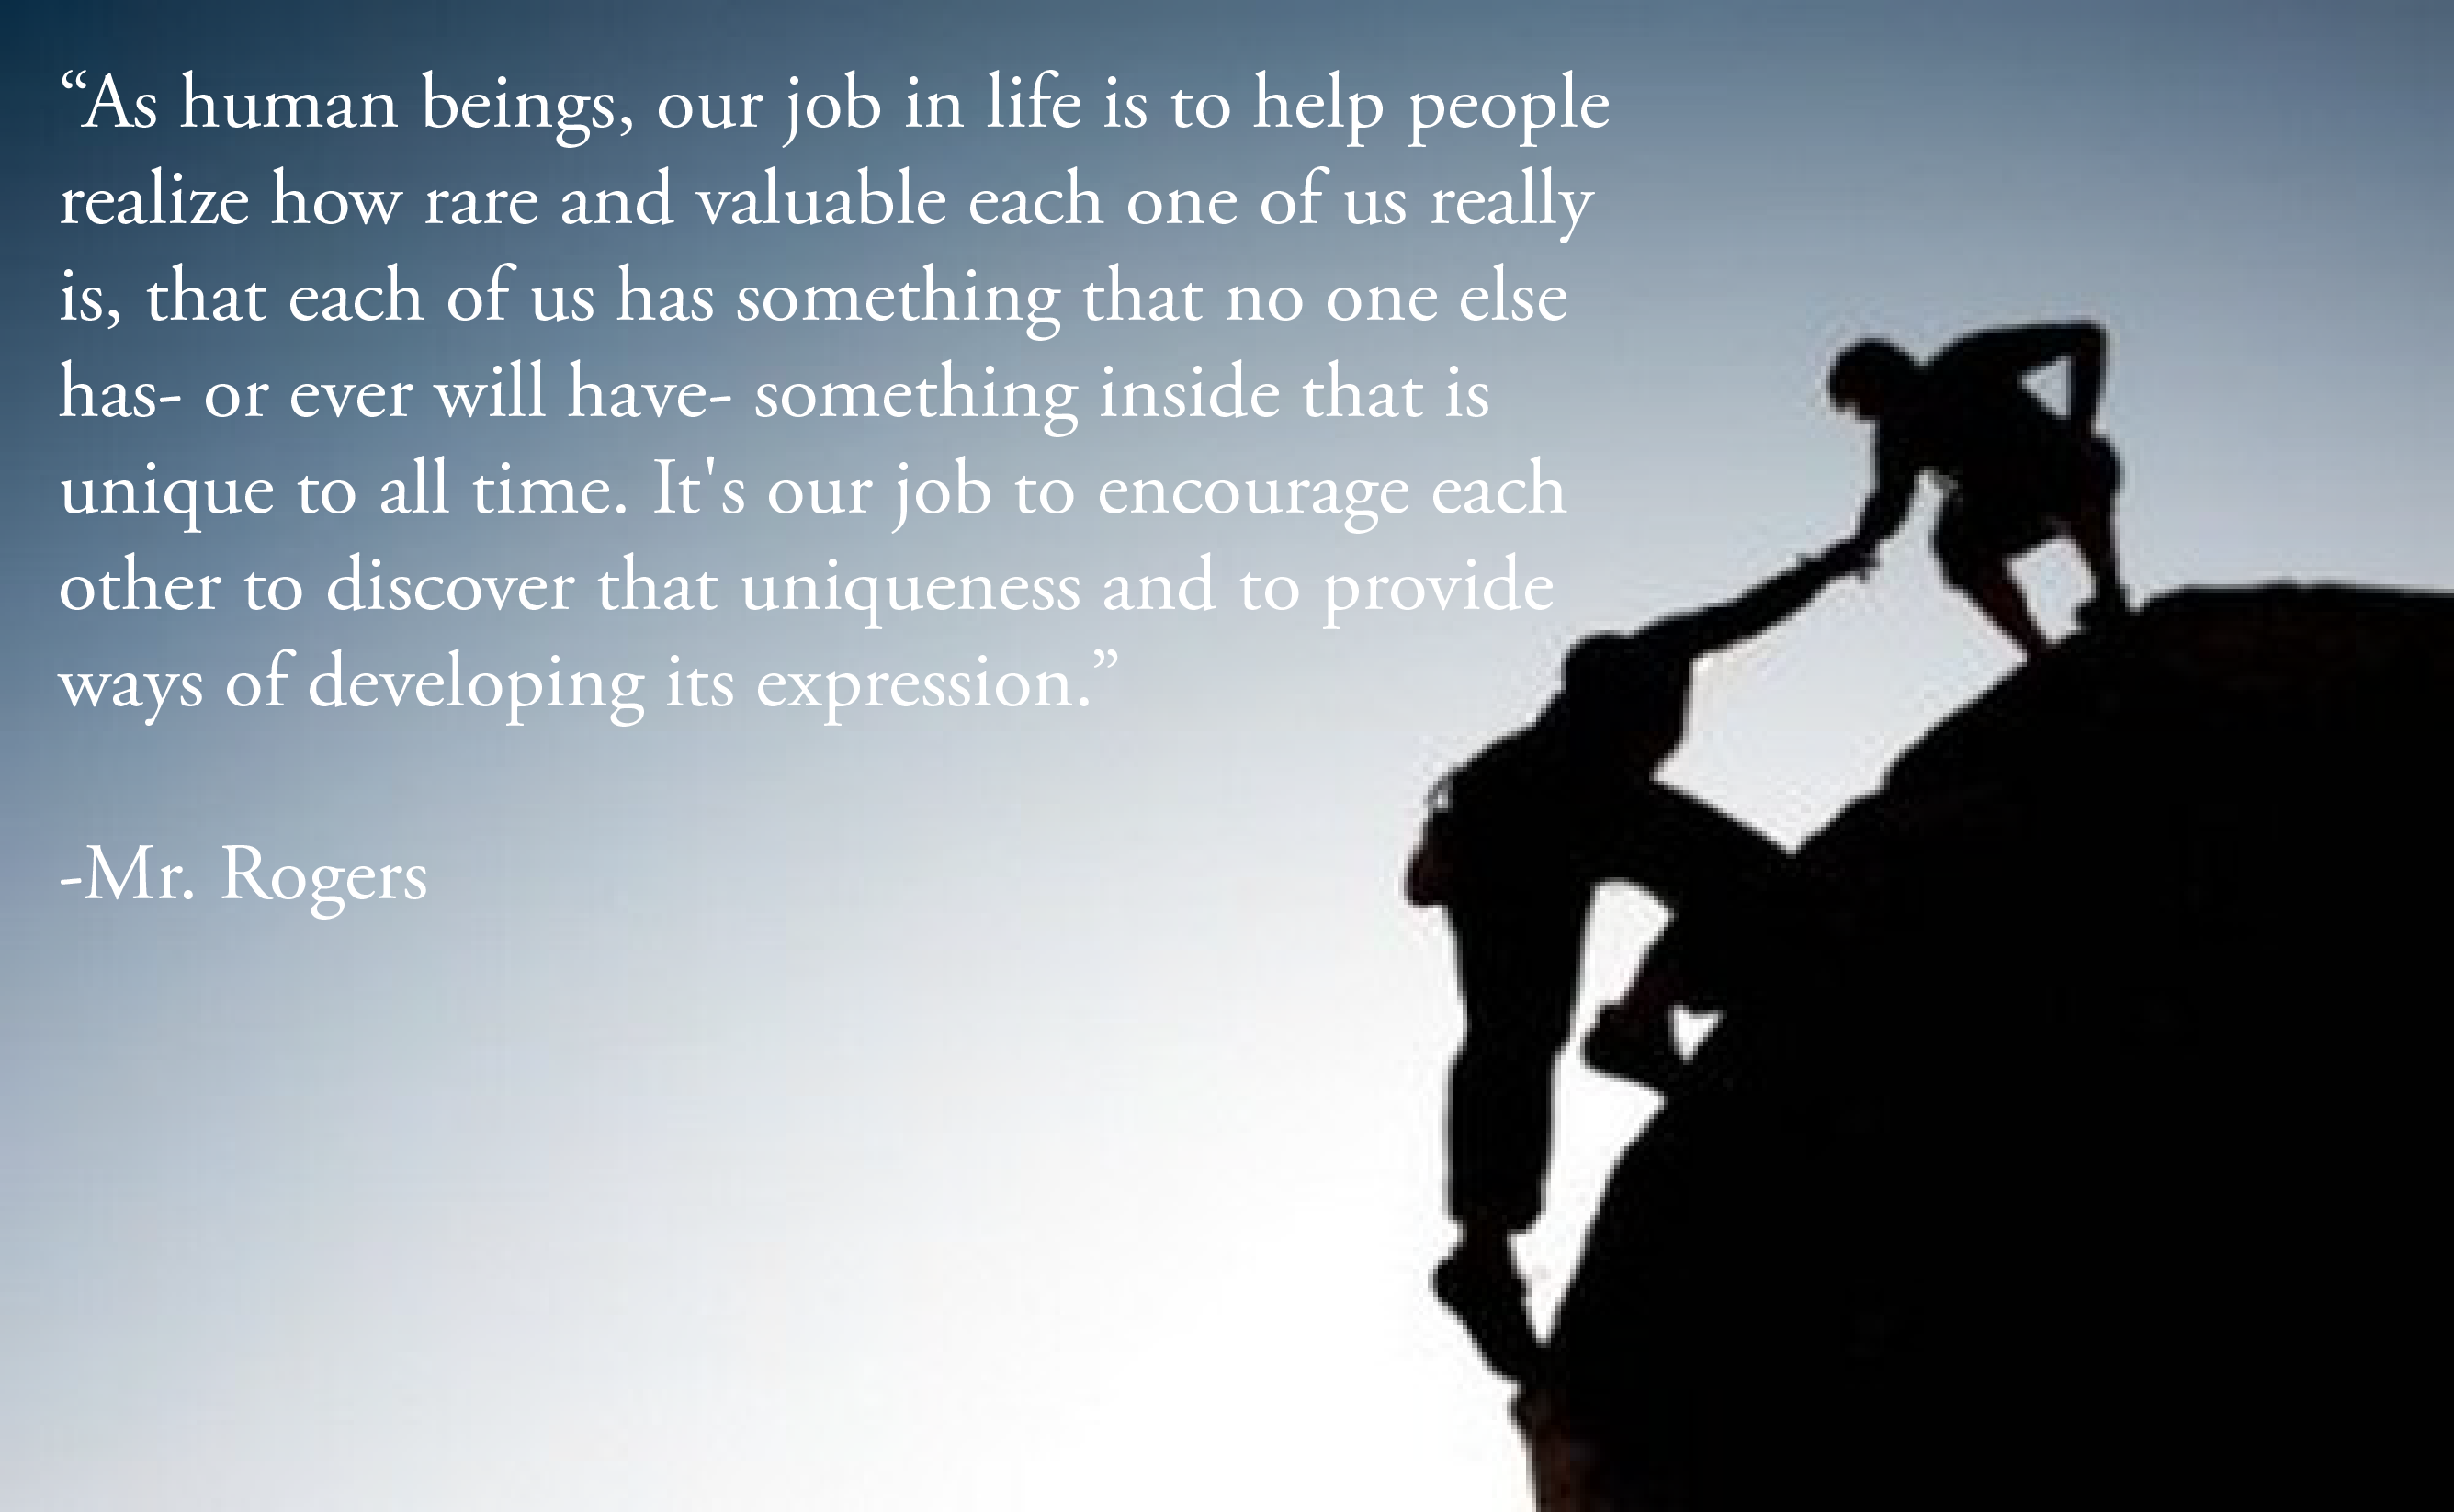 "As human beings, our job in life is to help people realize how rare and valuable each one of us really is, that each of us has something that no one else has--or ever will have--something inside that is unique to all time. It's our job to encourage each other to discover that uniqueness and to provide ways of developing its expression." -Mr. Rogers motivational quote